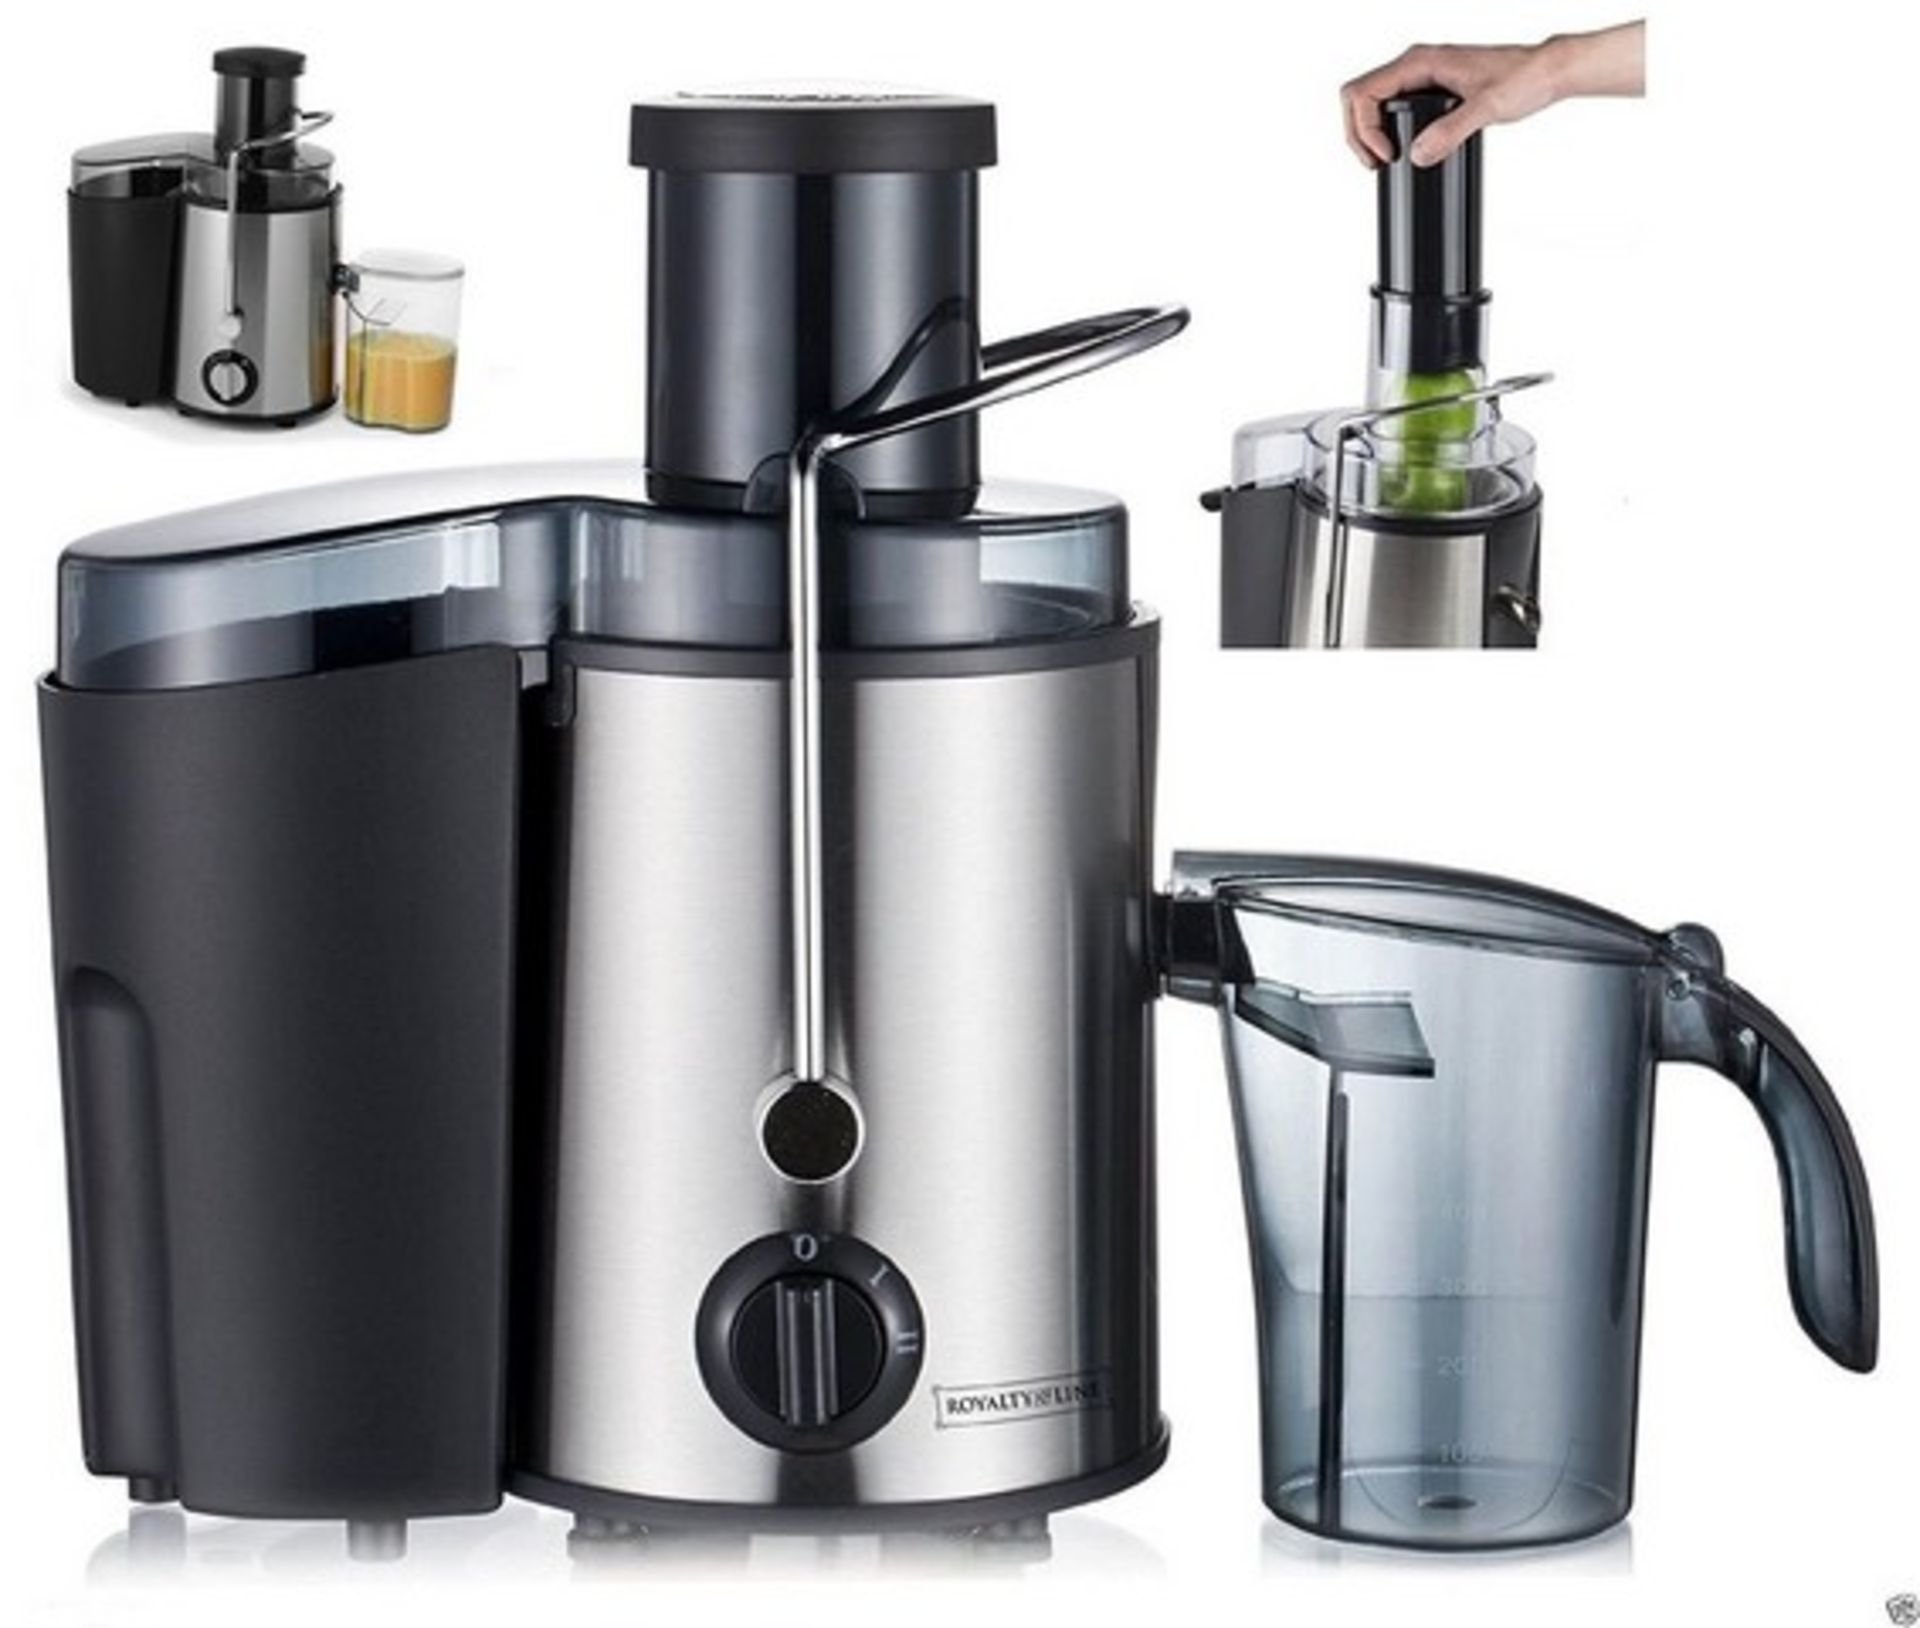 V Brand New 1000W Juice Extractor - Extra Large Filler Spout - Flexible anti-drip Juice Spout - High